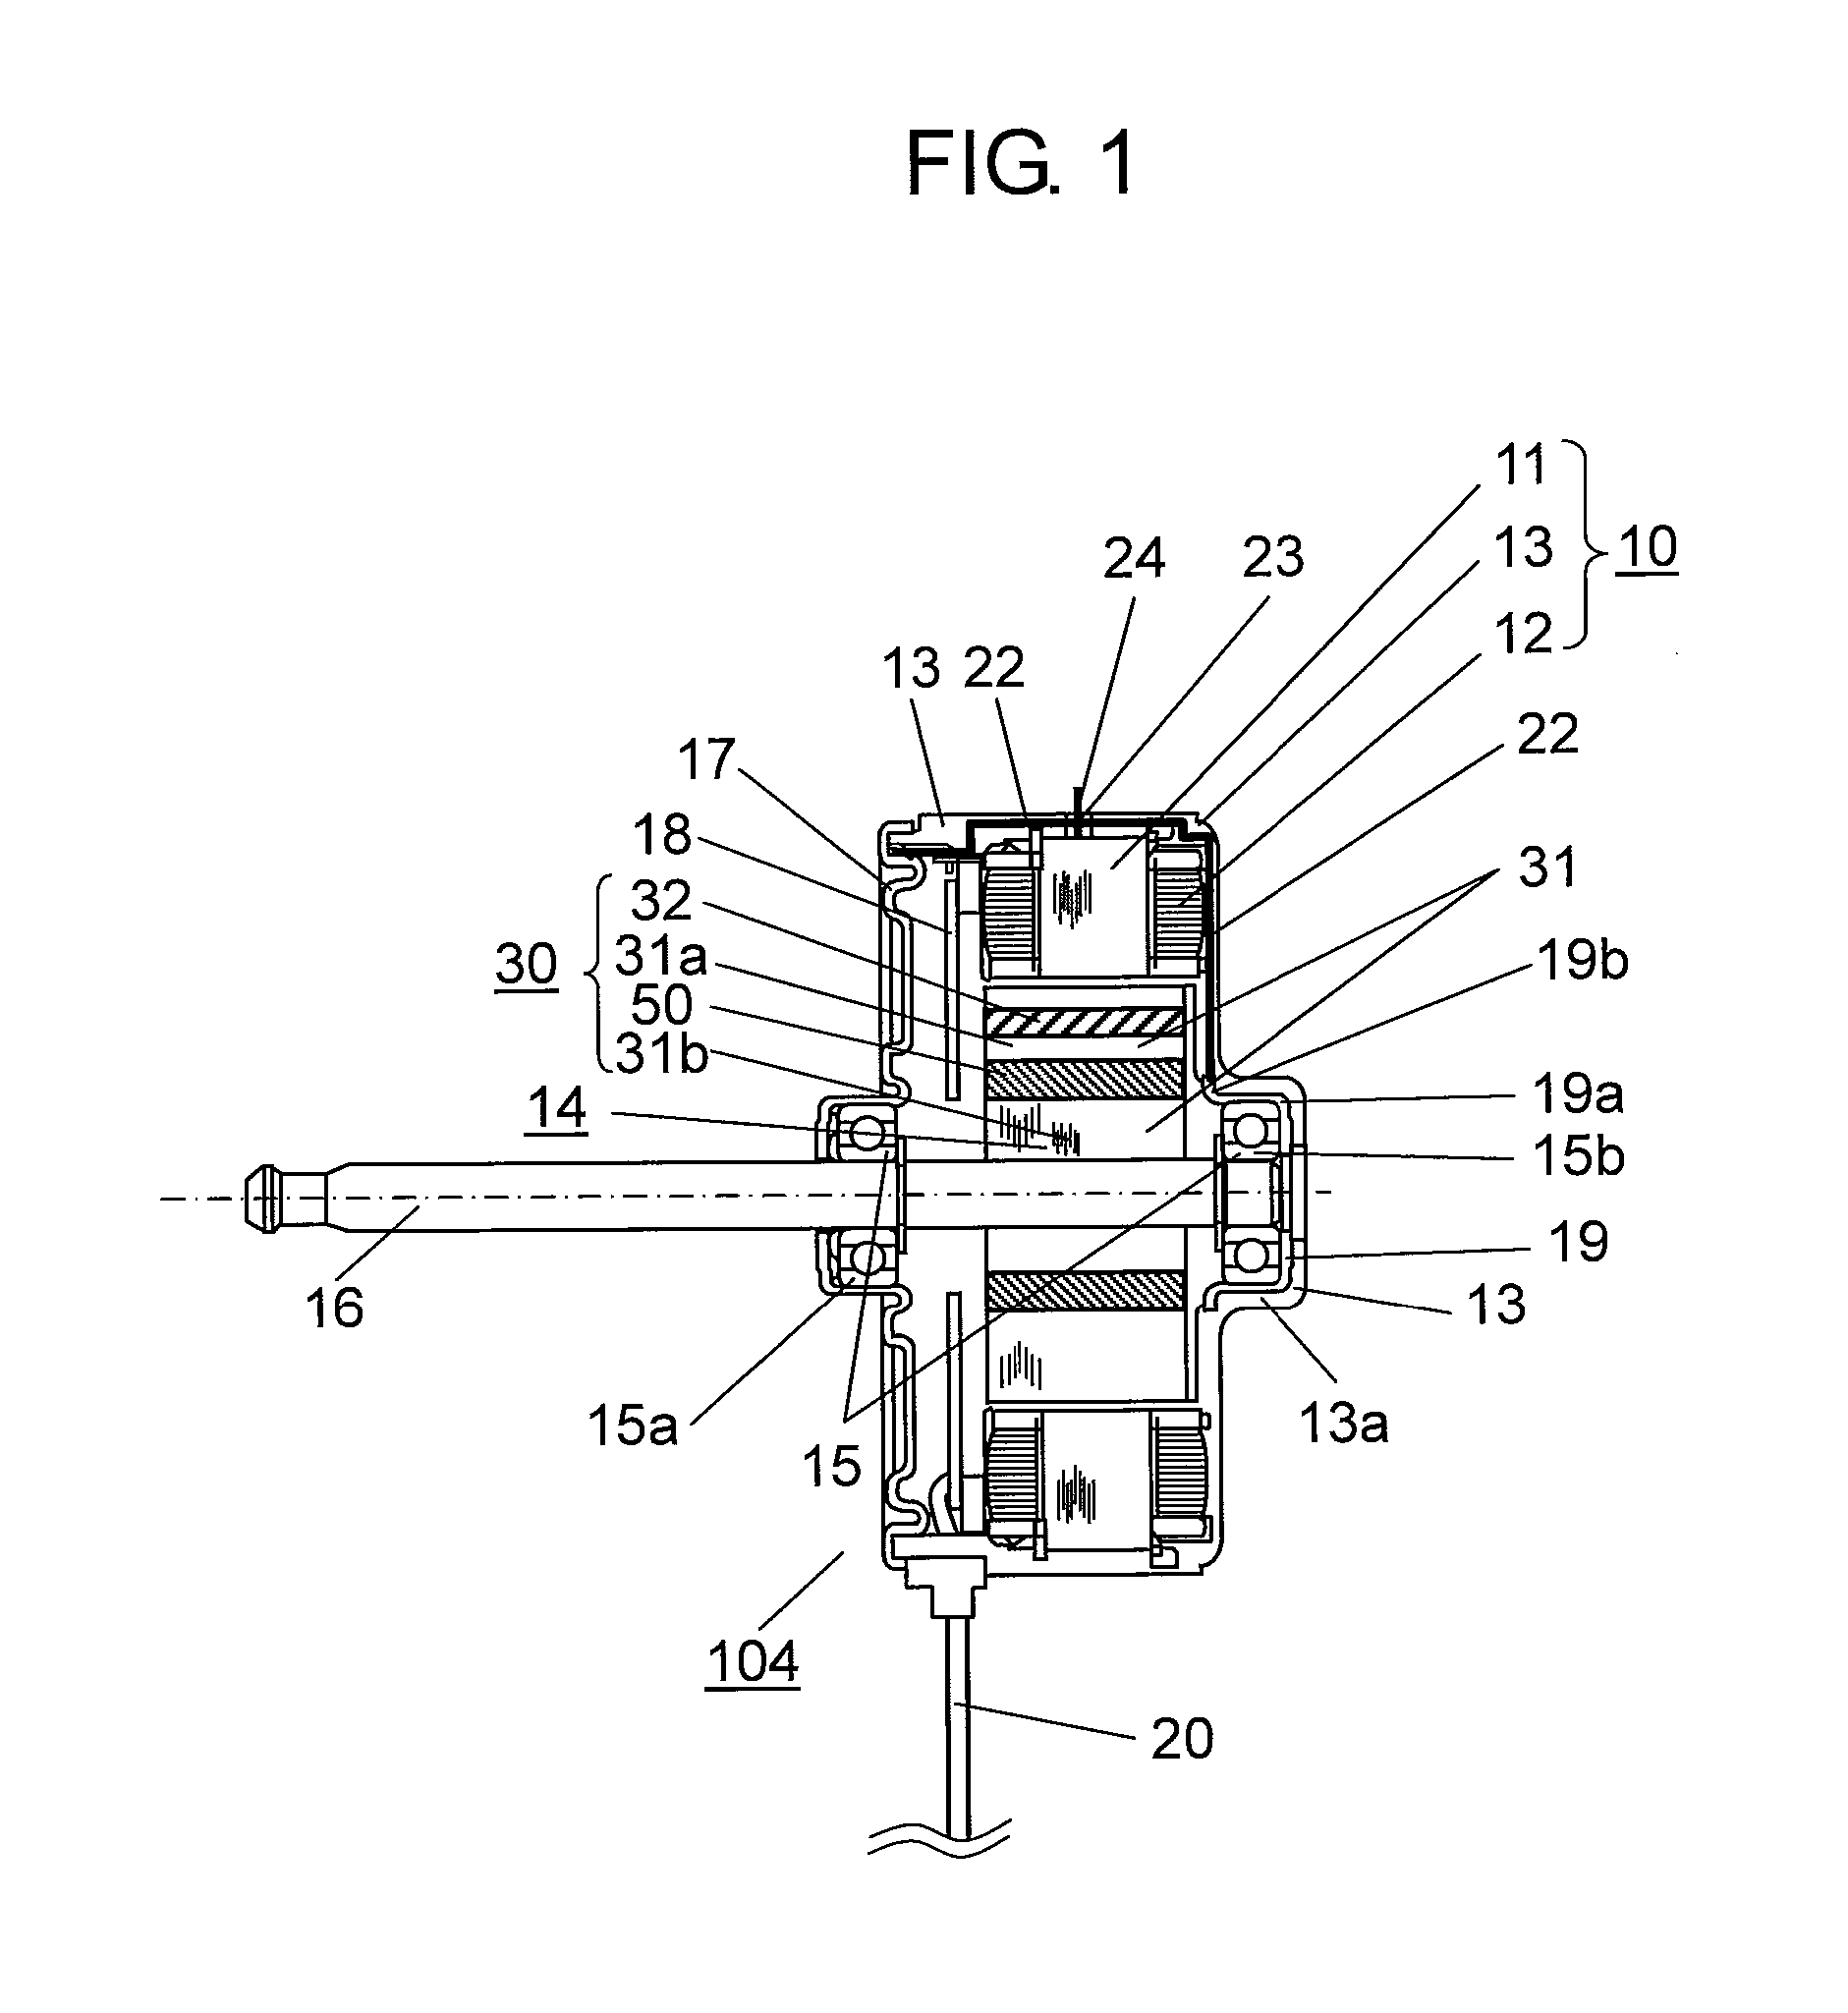 Motor and electrical appliance provided with same